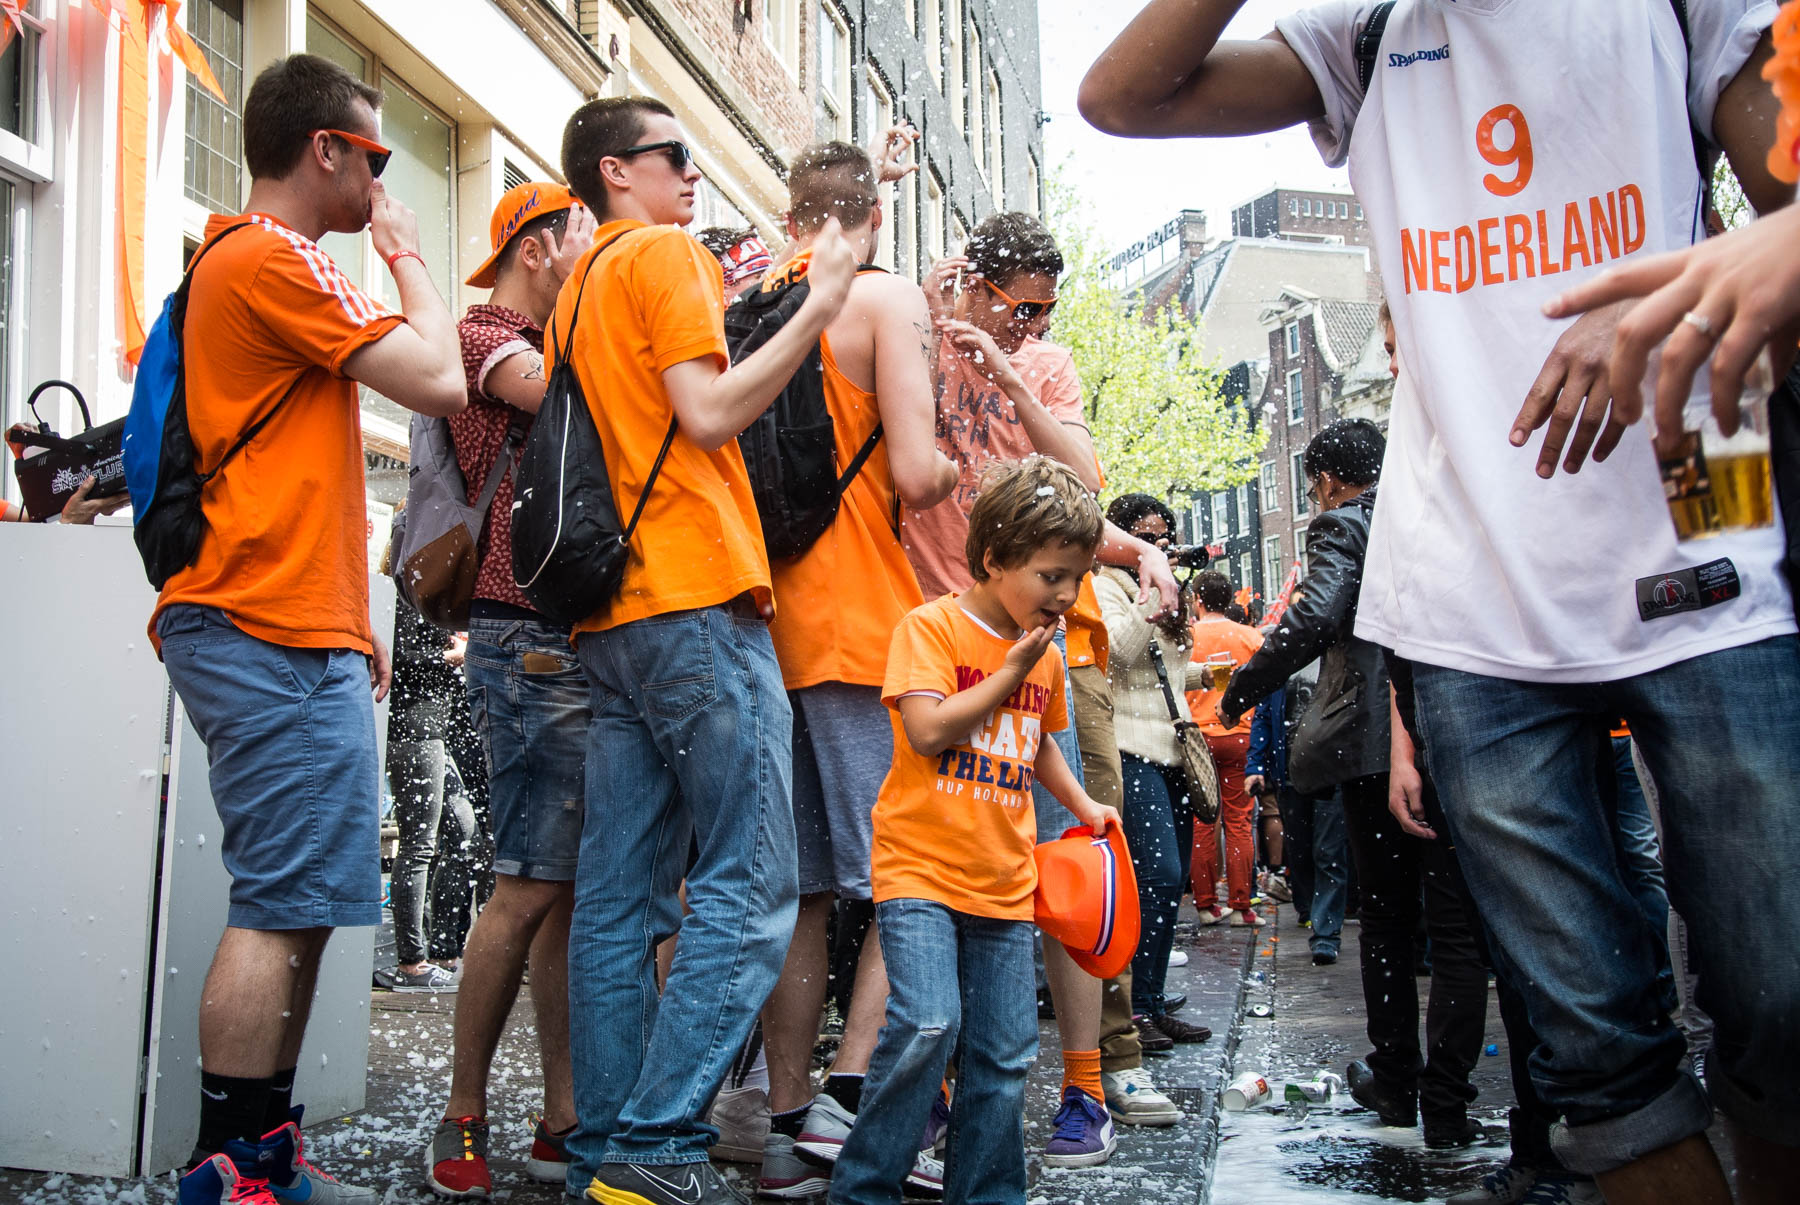 People partying on the street in orange clothes during King's Day in Amsterdam